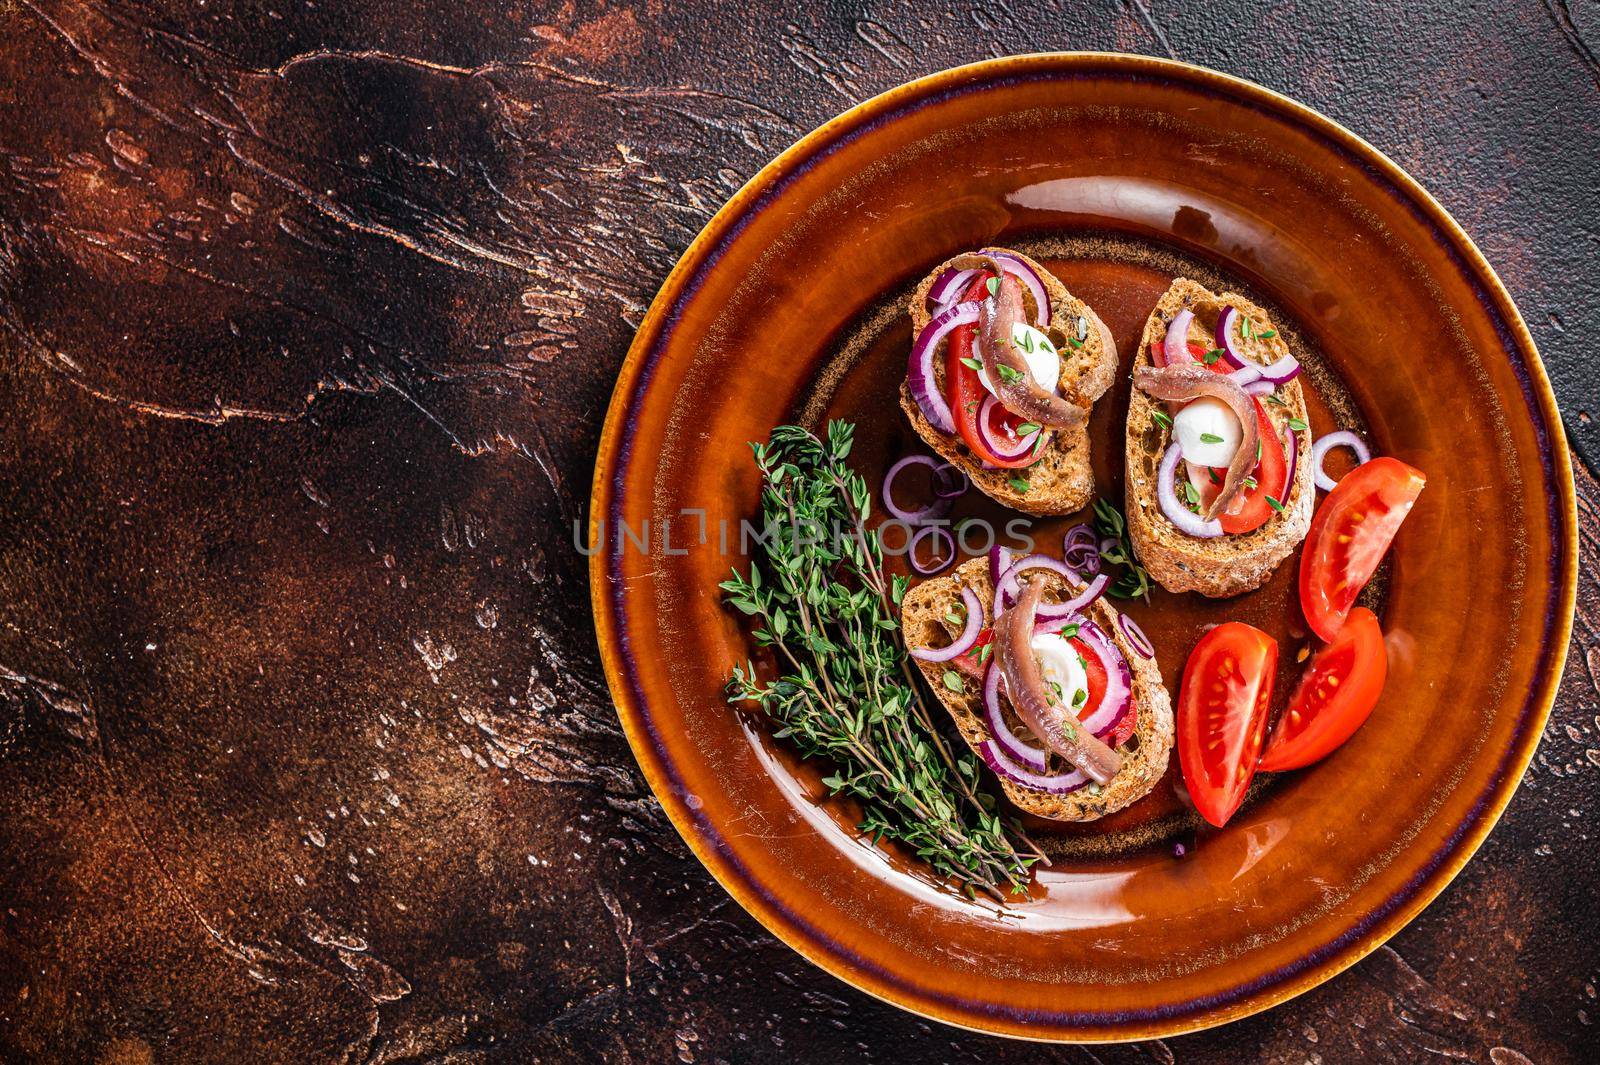 Spanish tapas on bread with olive oil, herbs, tomatoes and spicy anchovy fillets. Dark background. Top view. Copy space.